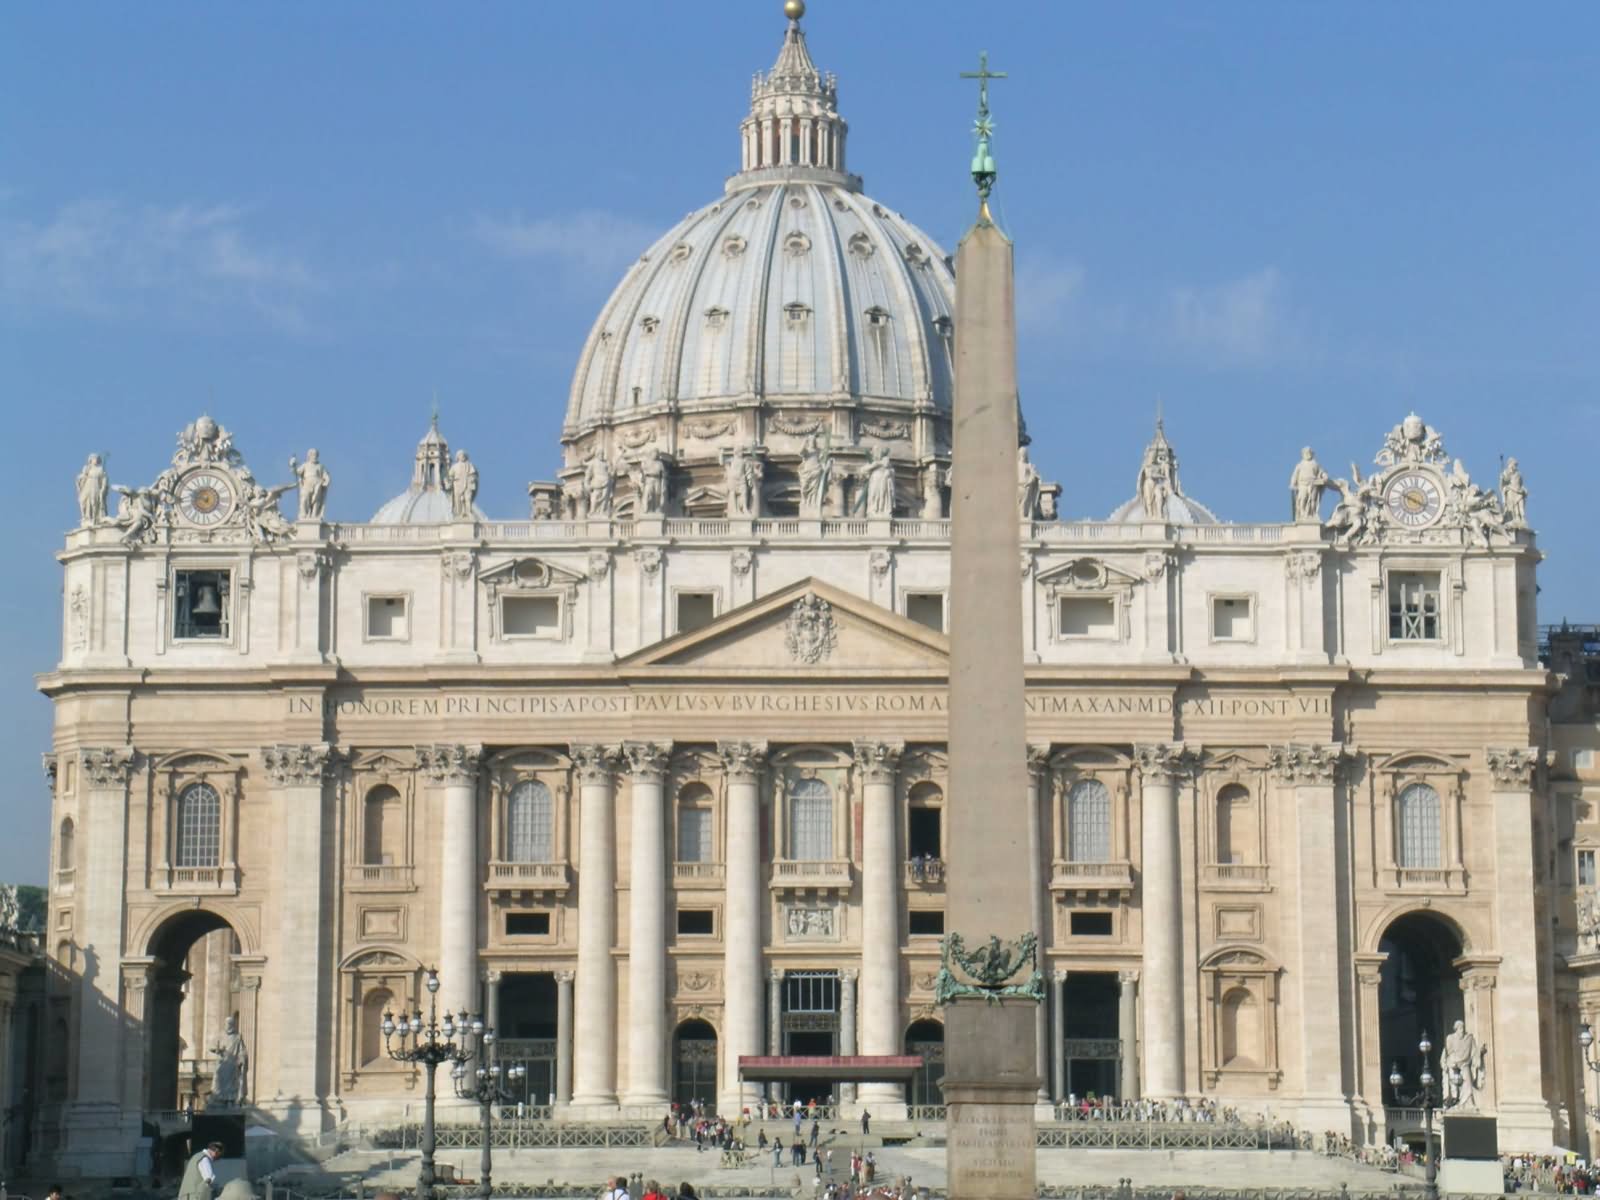 Front View of St. Peter's Basilica